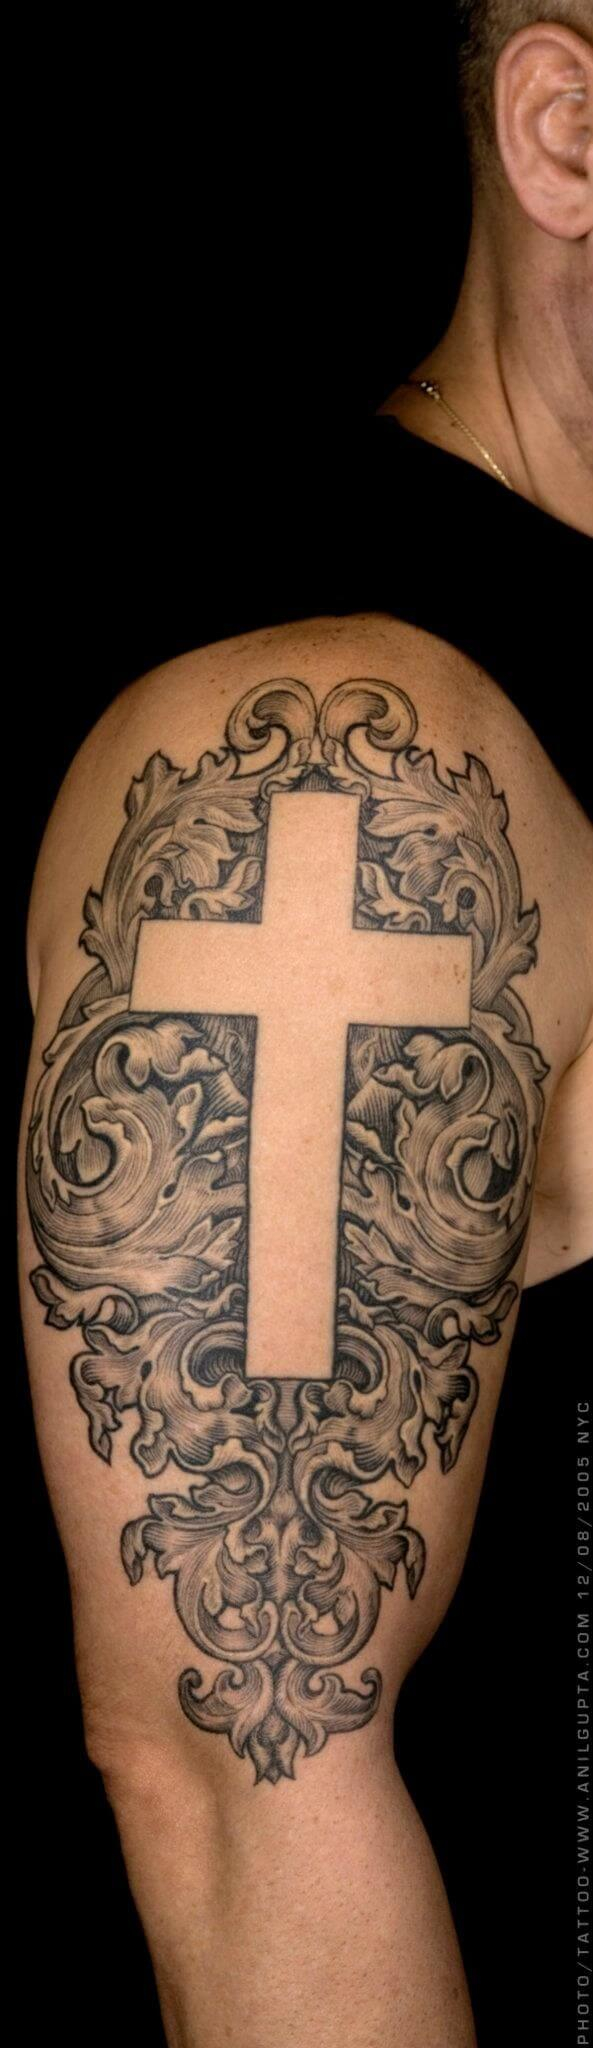 56 Best Cross Tattoos For Men Improb with regard to dimensions 593 X 2048